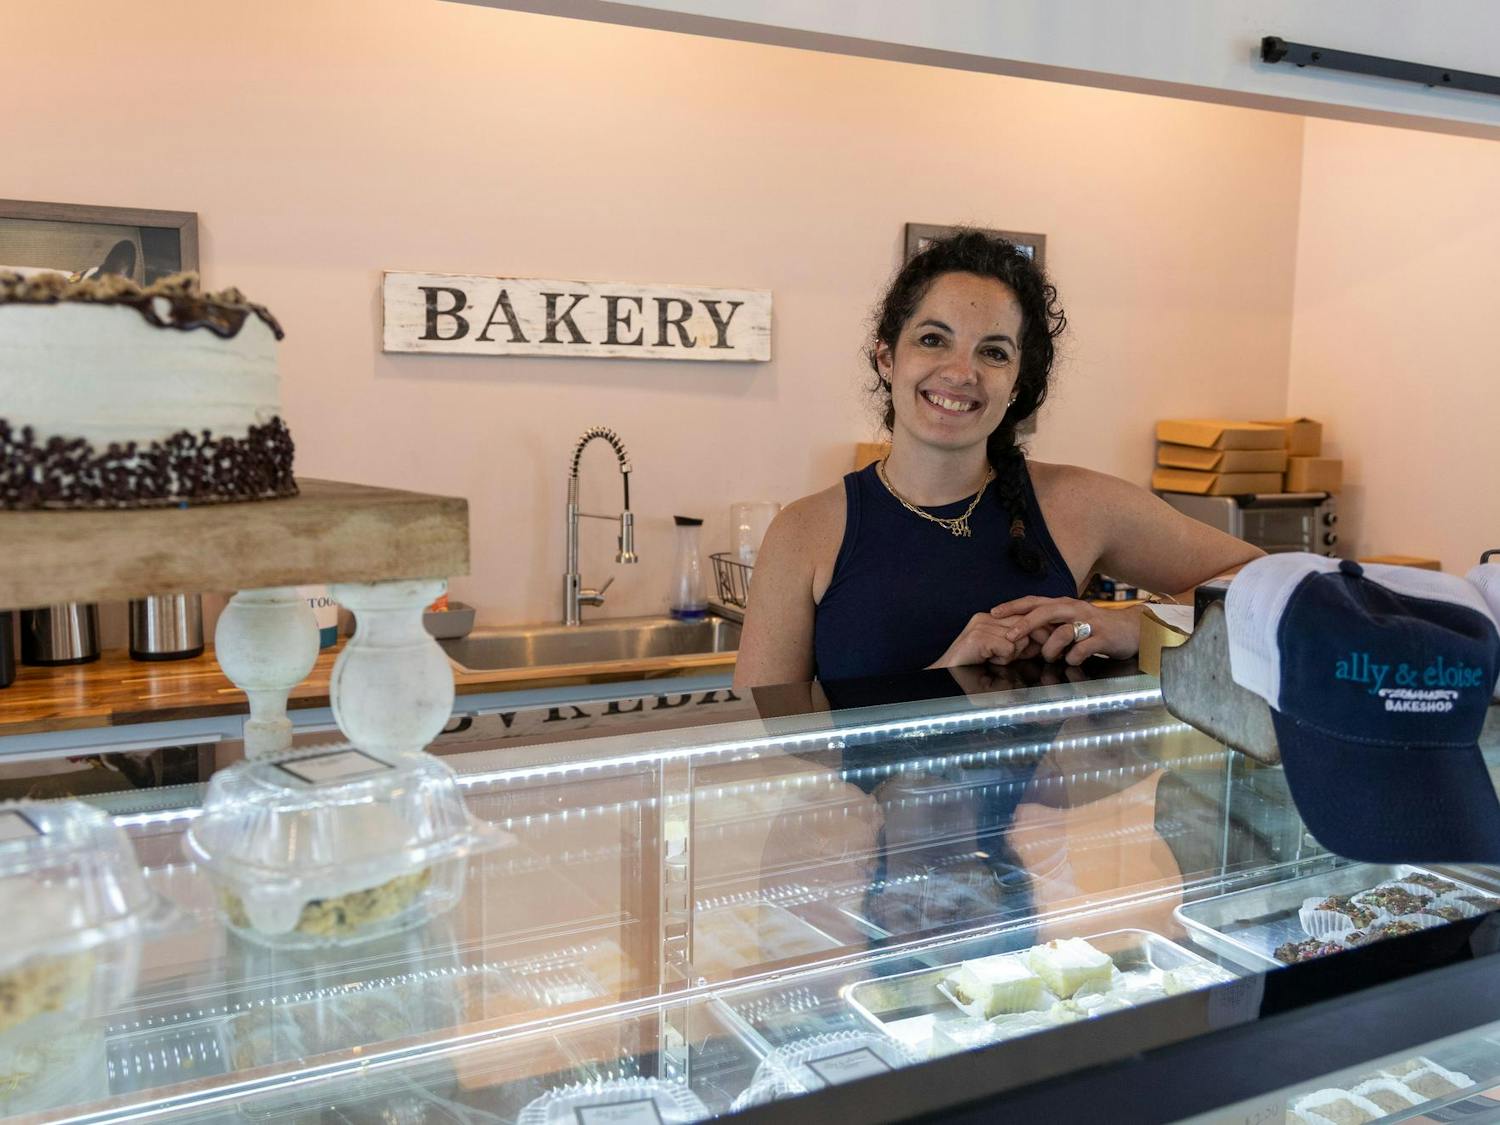 The owner of Ally &amp; Eloise, Aleka Selig, poses for a photo inside the bakery. Selig opened the bakery in April of 2012.